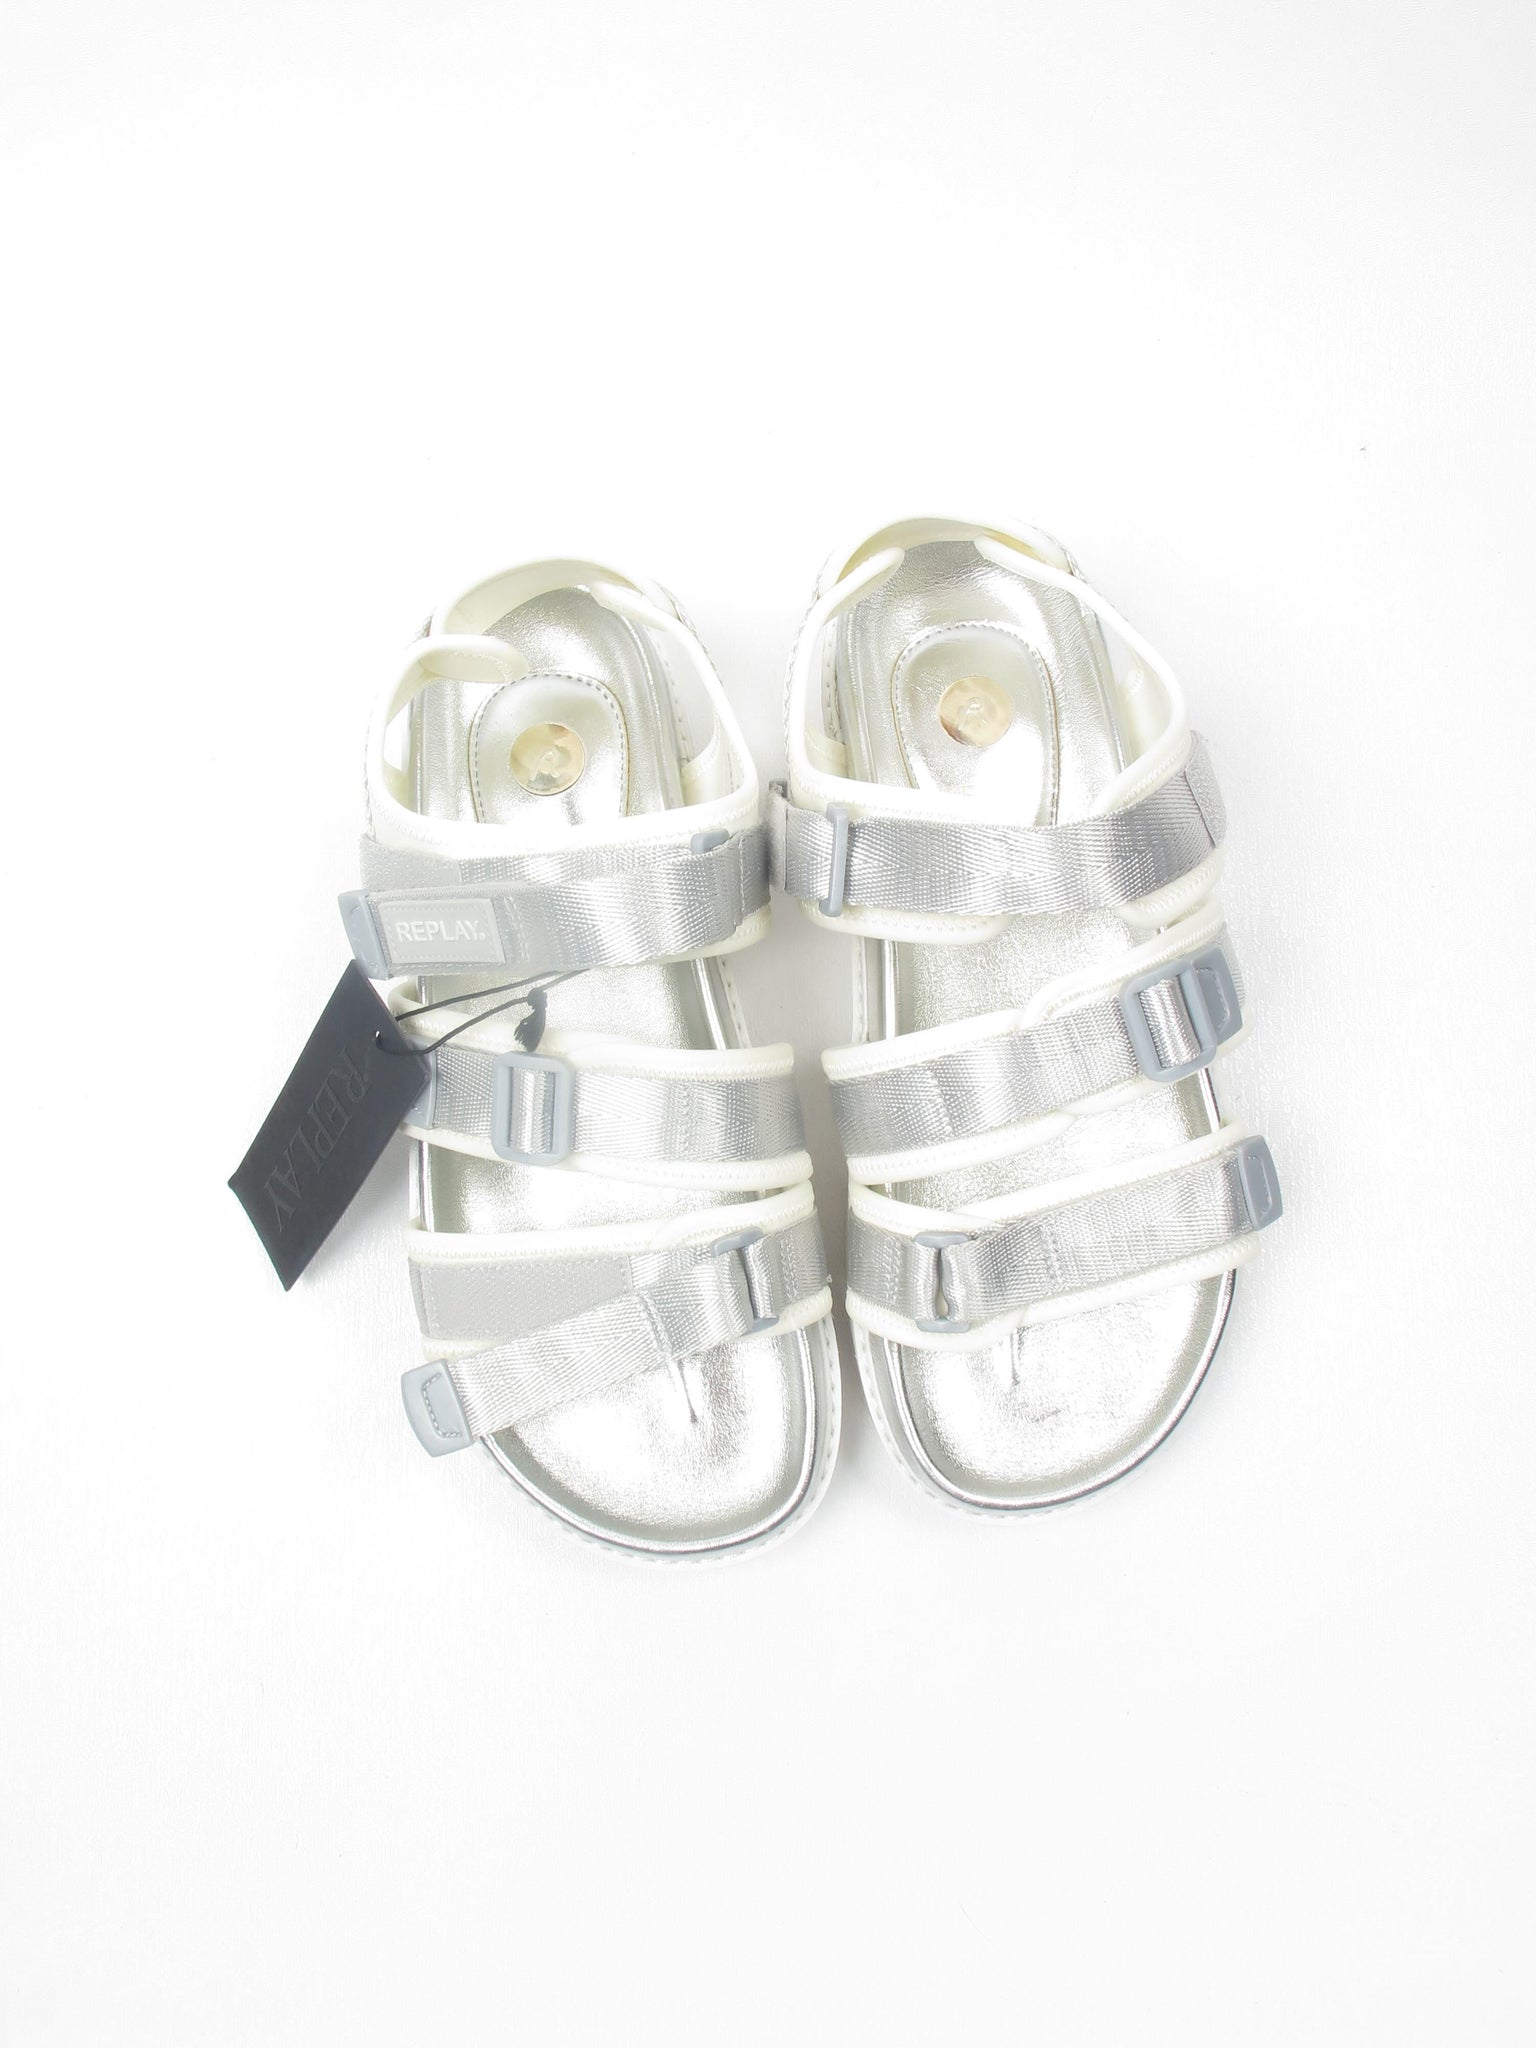 Women's Replay Silver Flatform Sandals 39/6 - The Harlequin